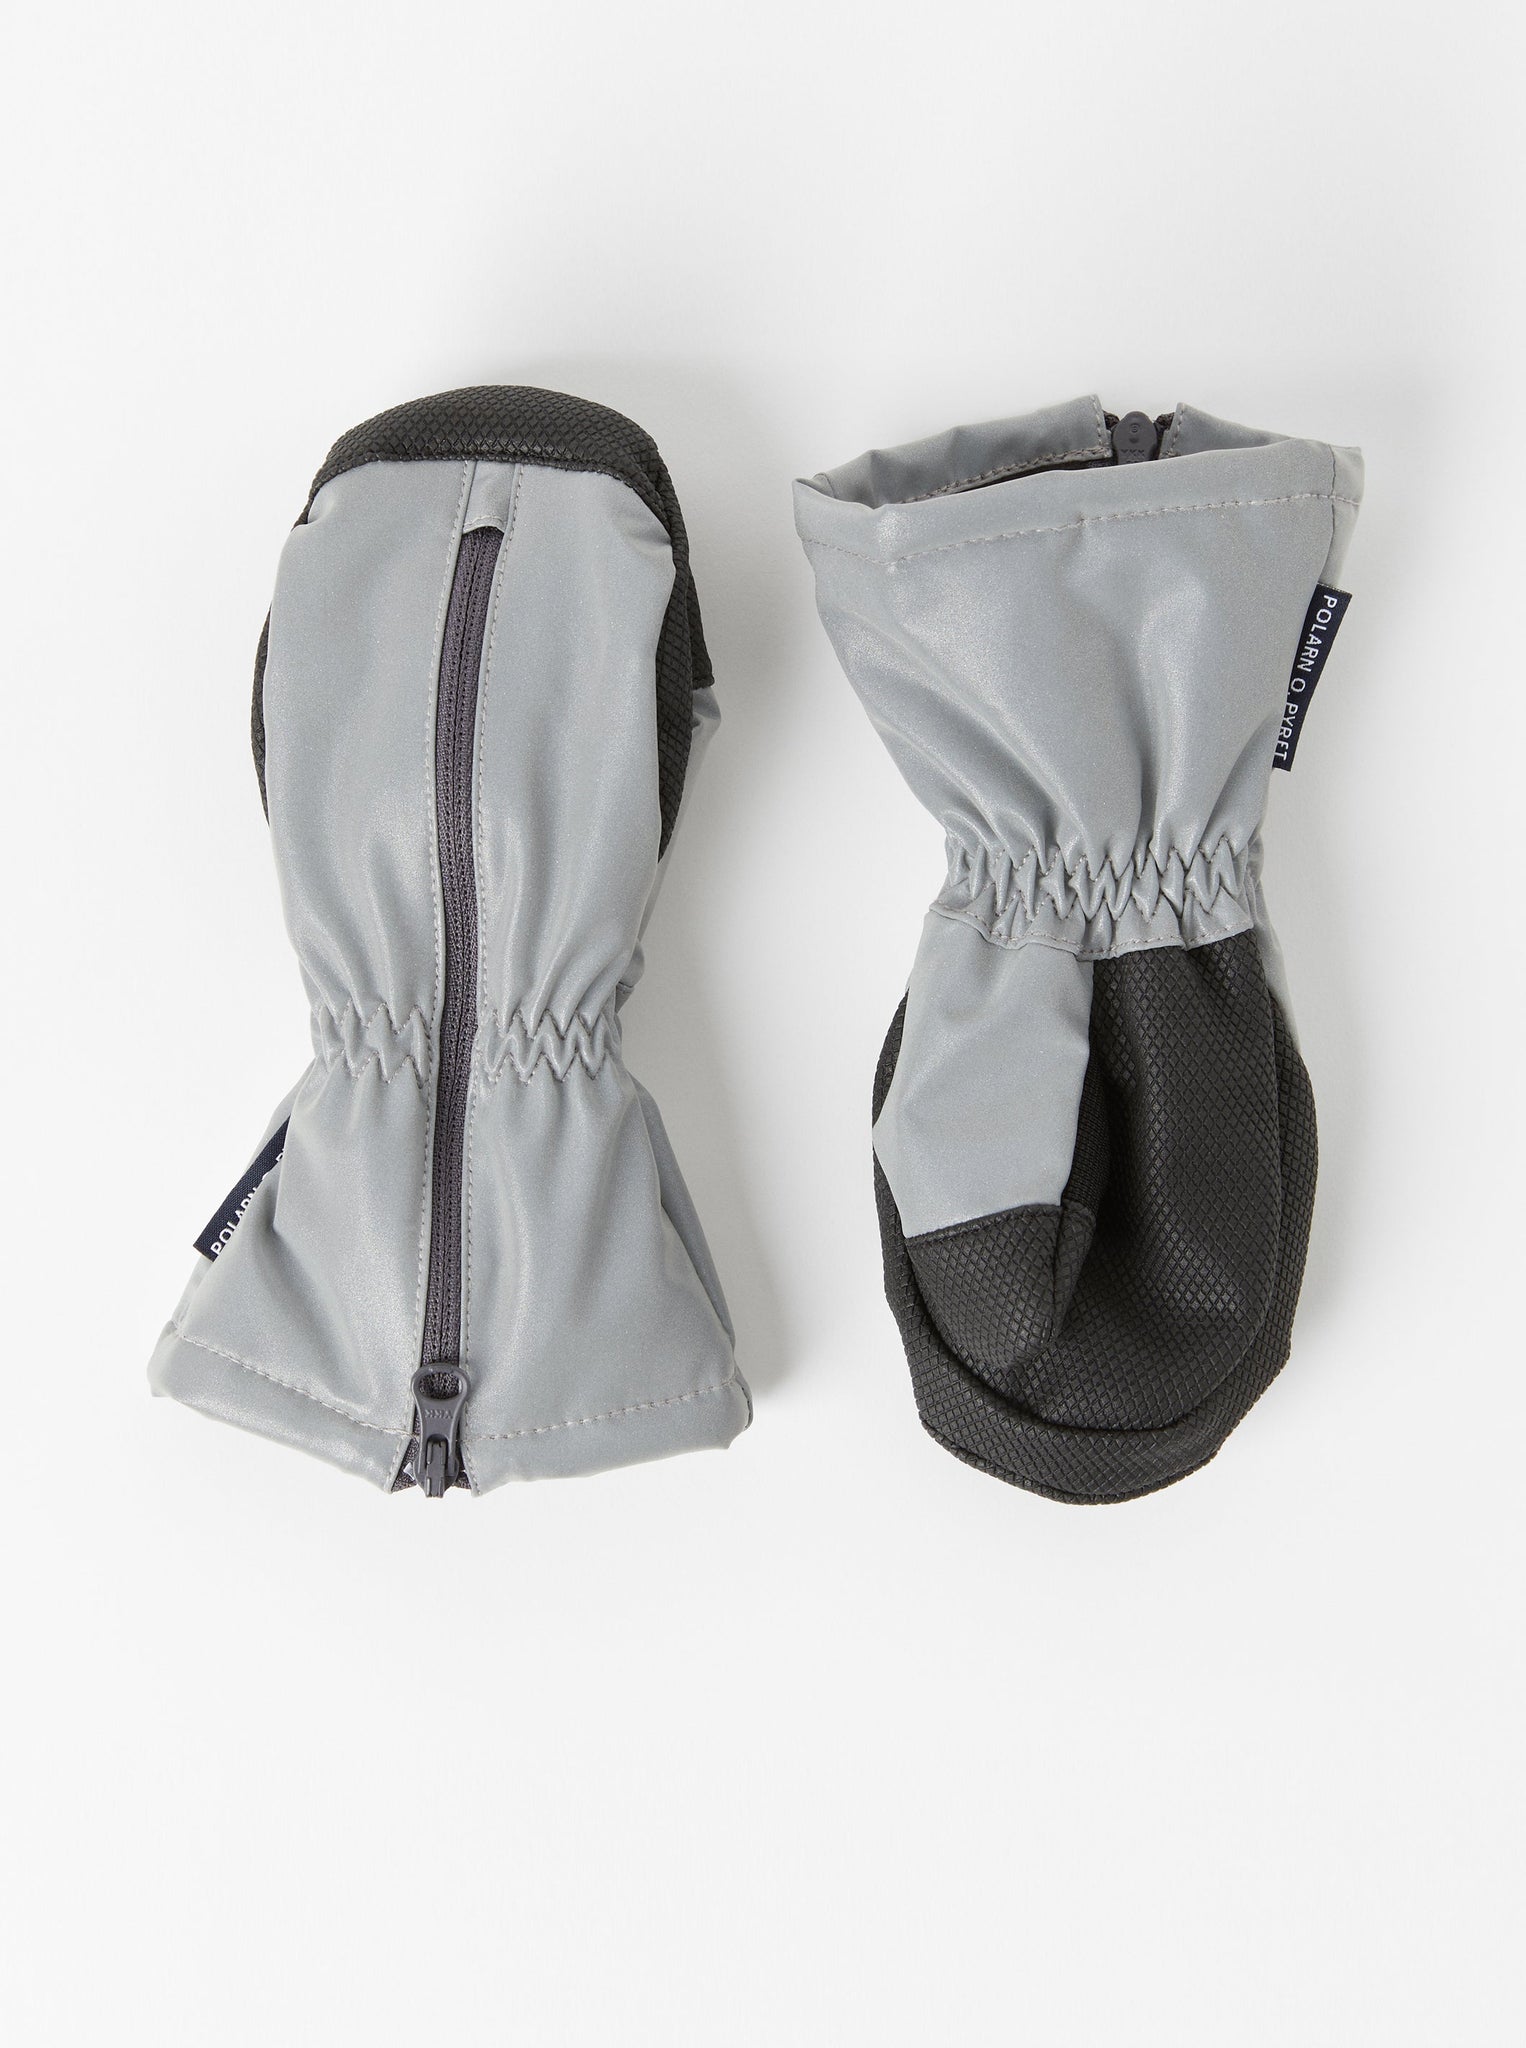 Grey Kids Padded Mittens from the Polarn O. Pyret kidswear collection. Made from sustainable sources.